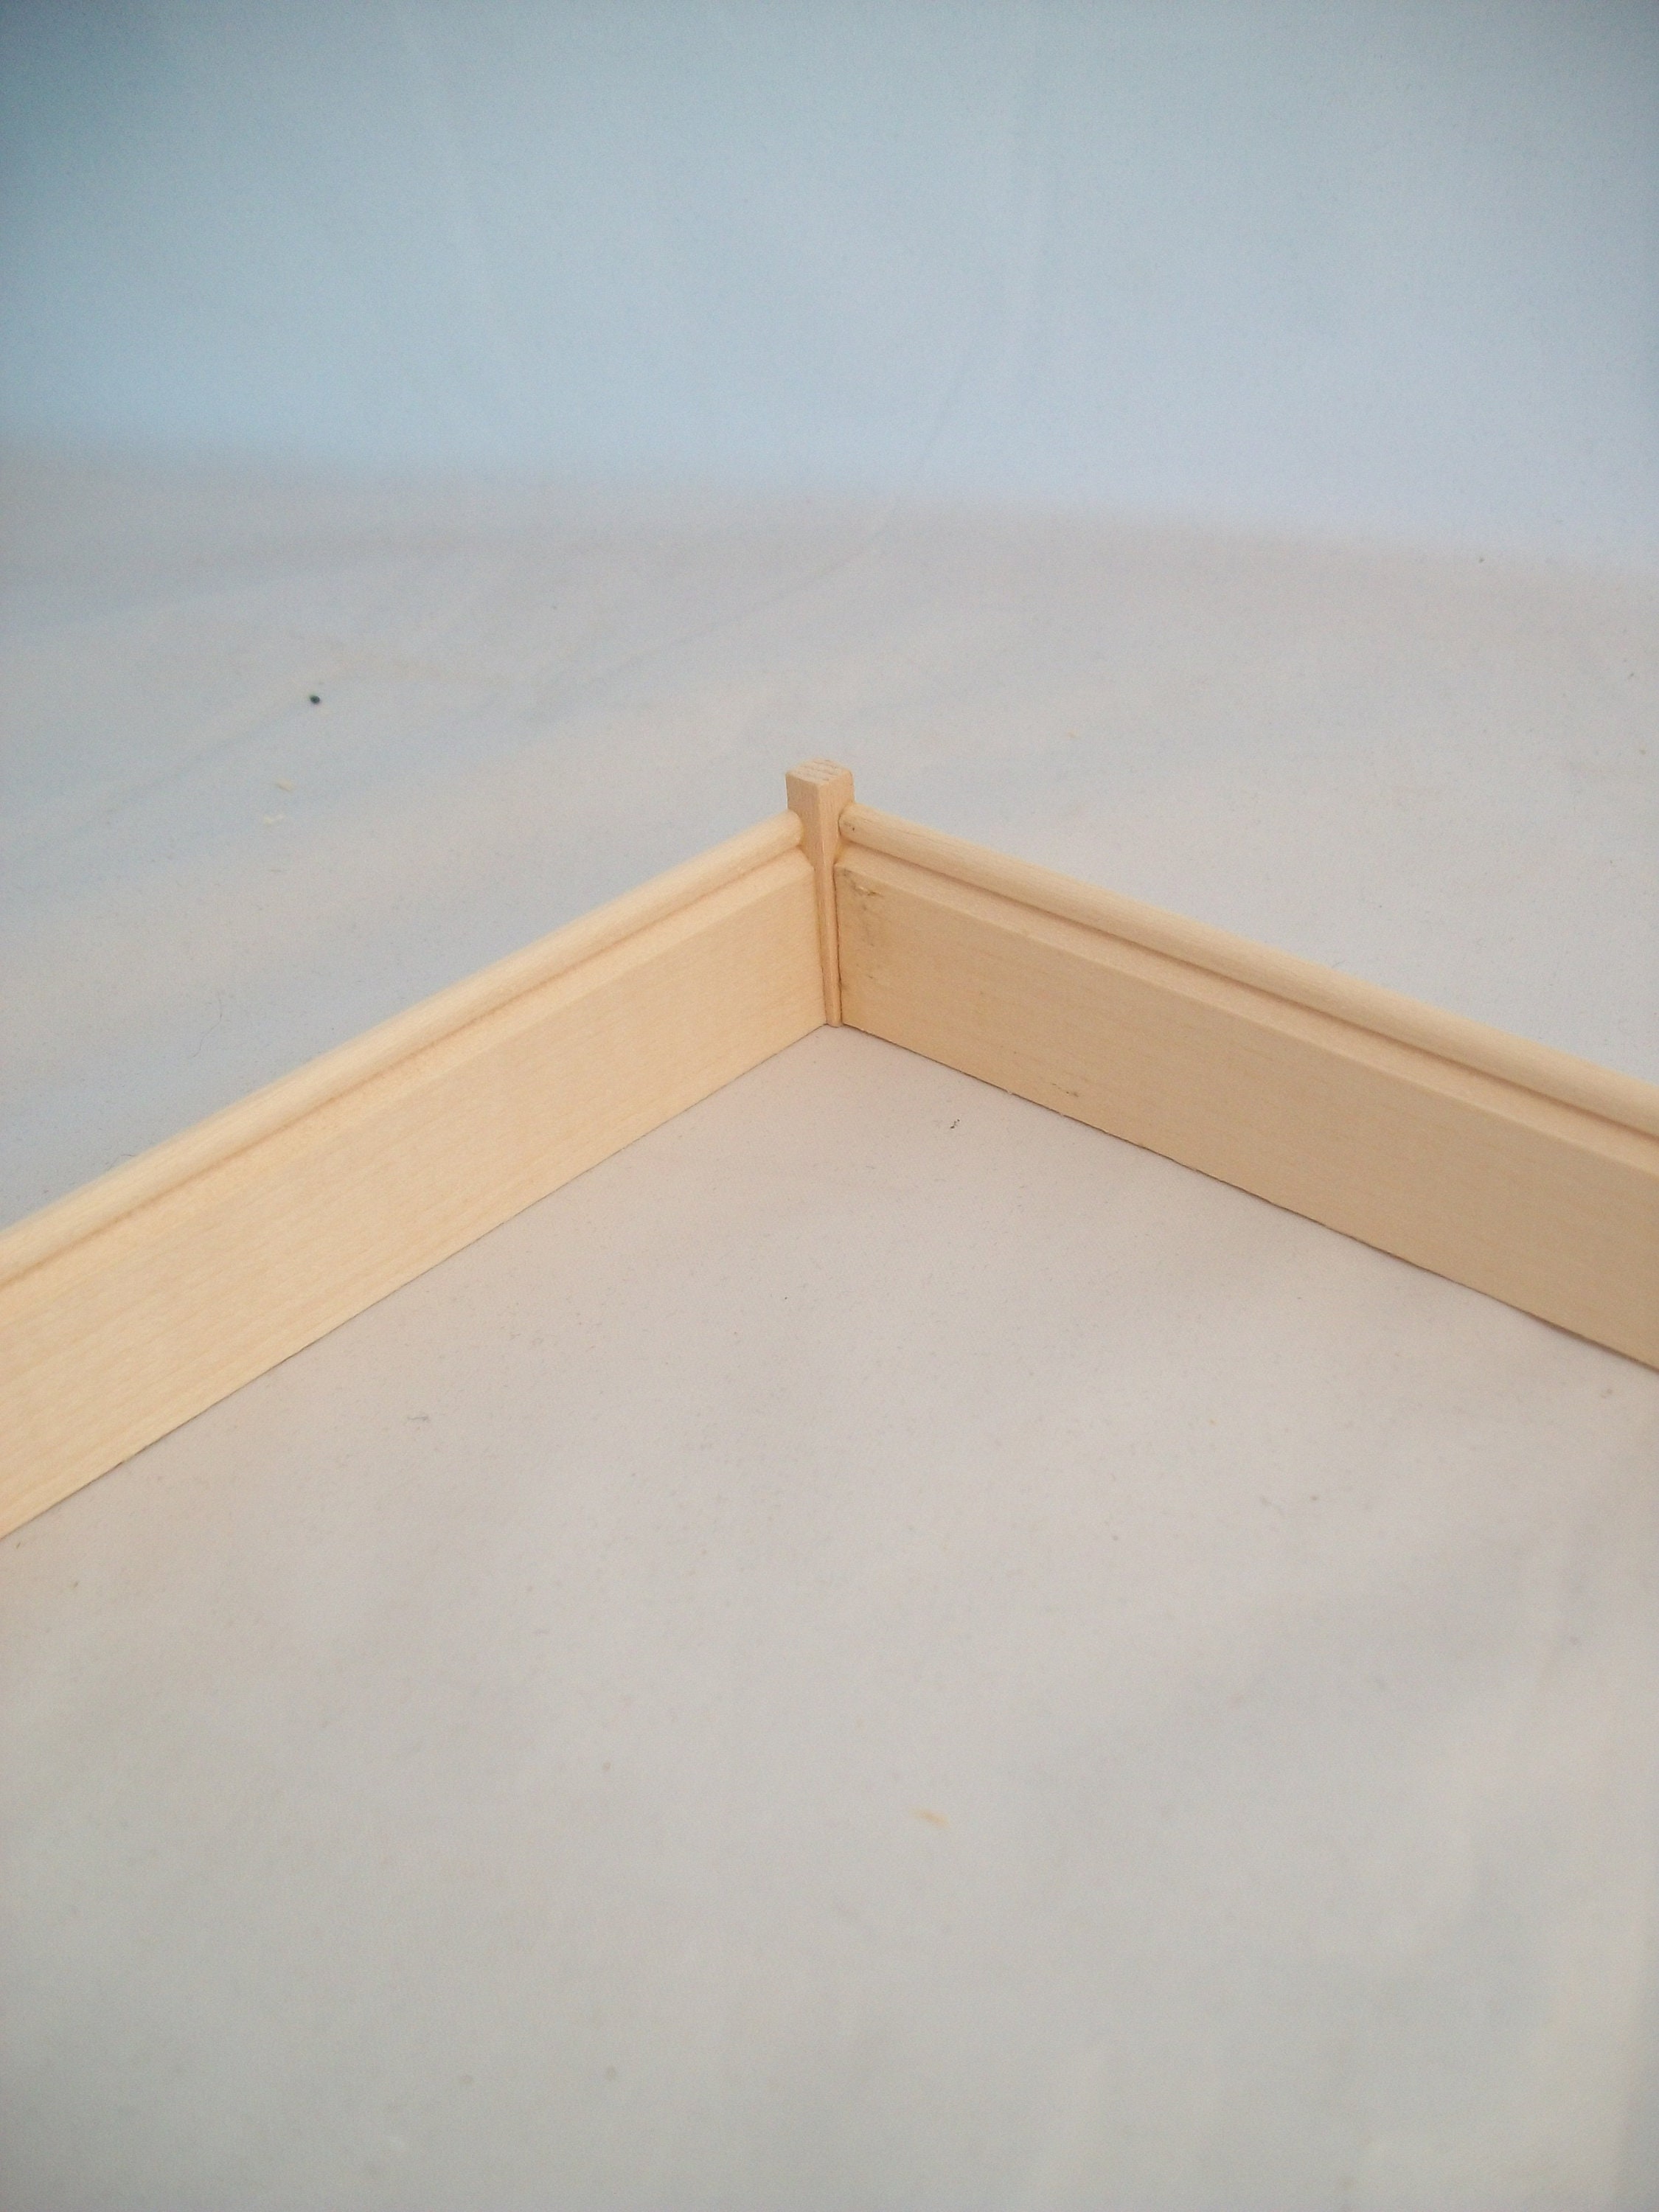 Corner Posts 1/8, 5 pieces, double-sided 1/8 inch basswood for